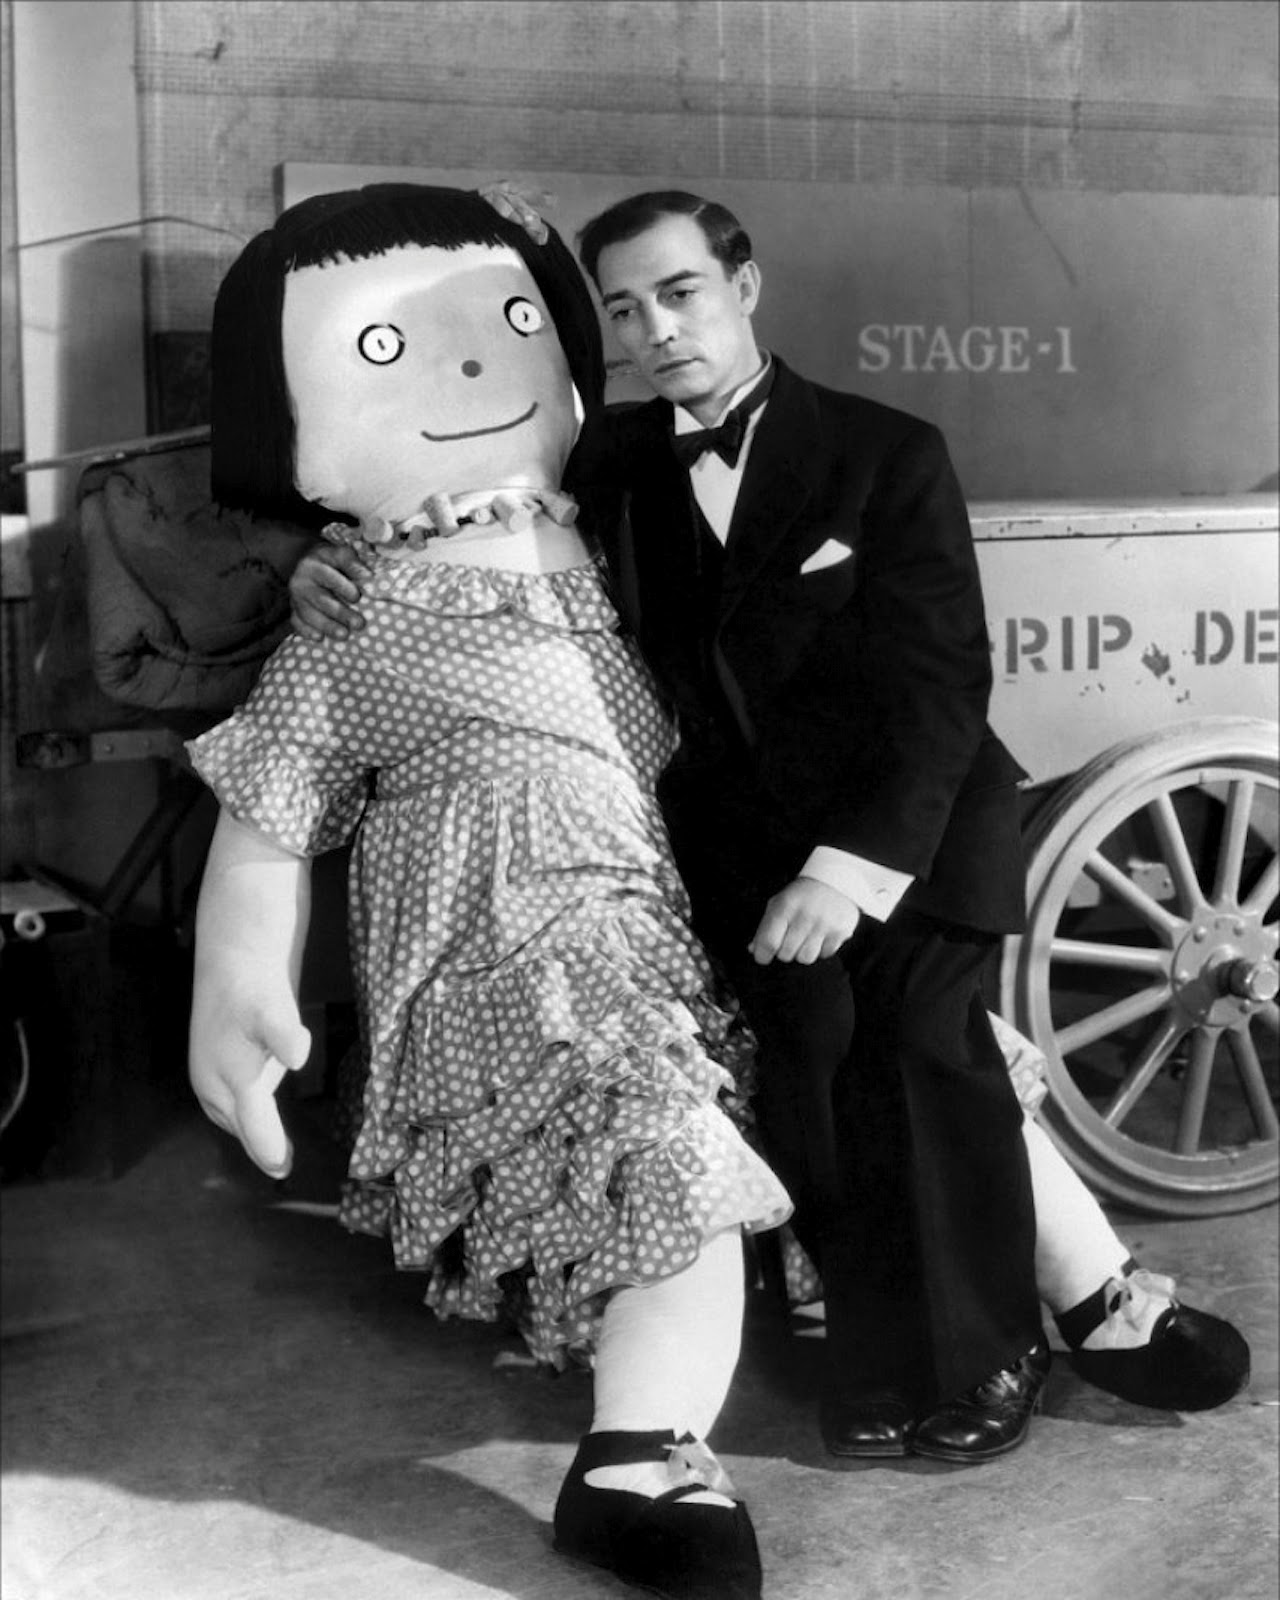 Buster+Keaton+with+Doll.jpg